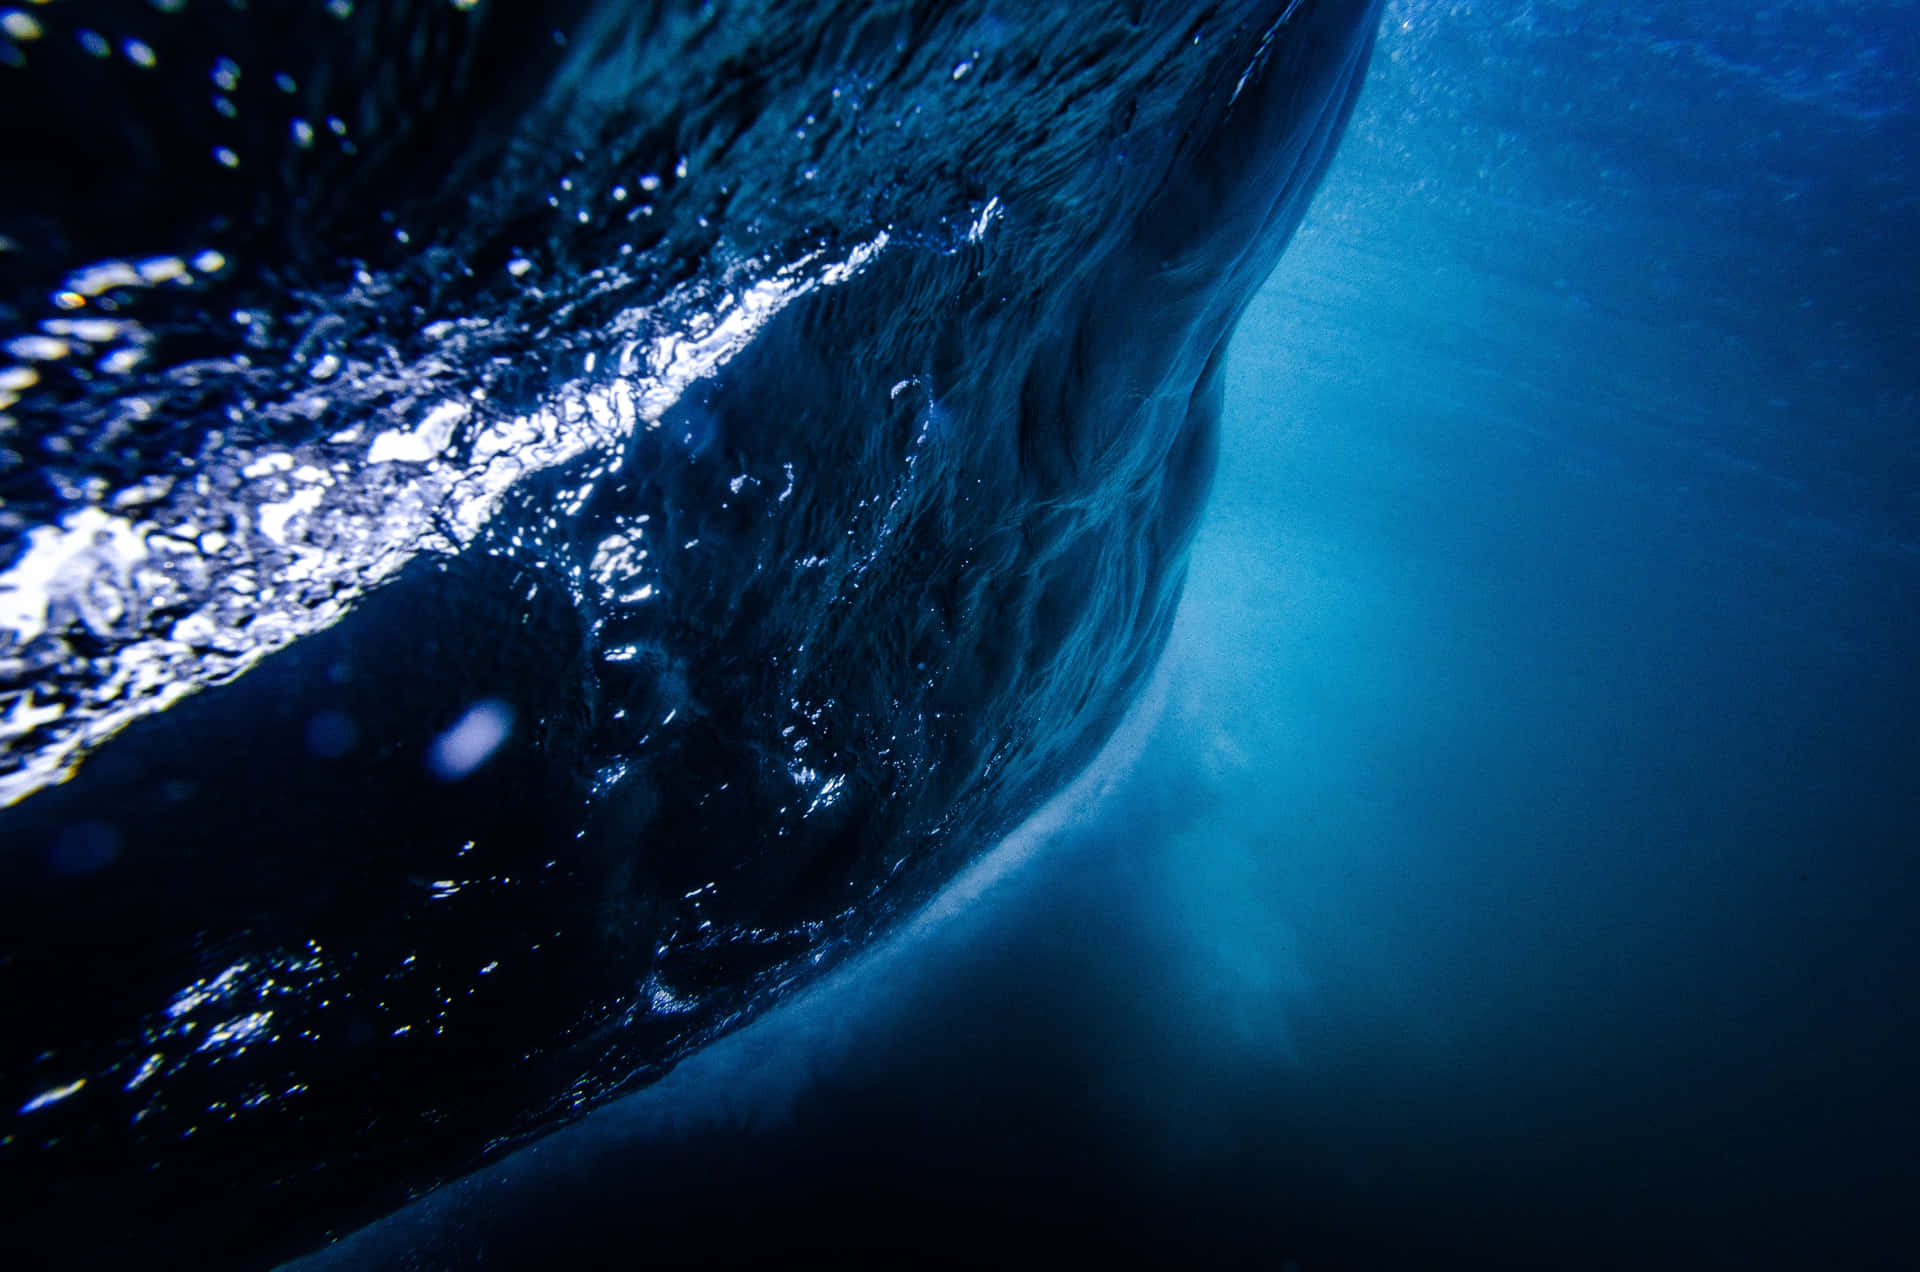 Exploring the depths of a mysterious, vibrant underwater ocean